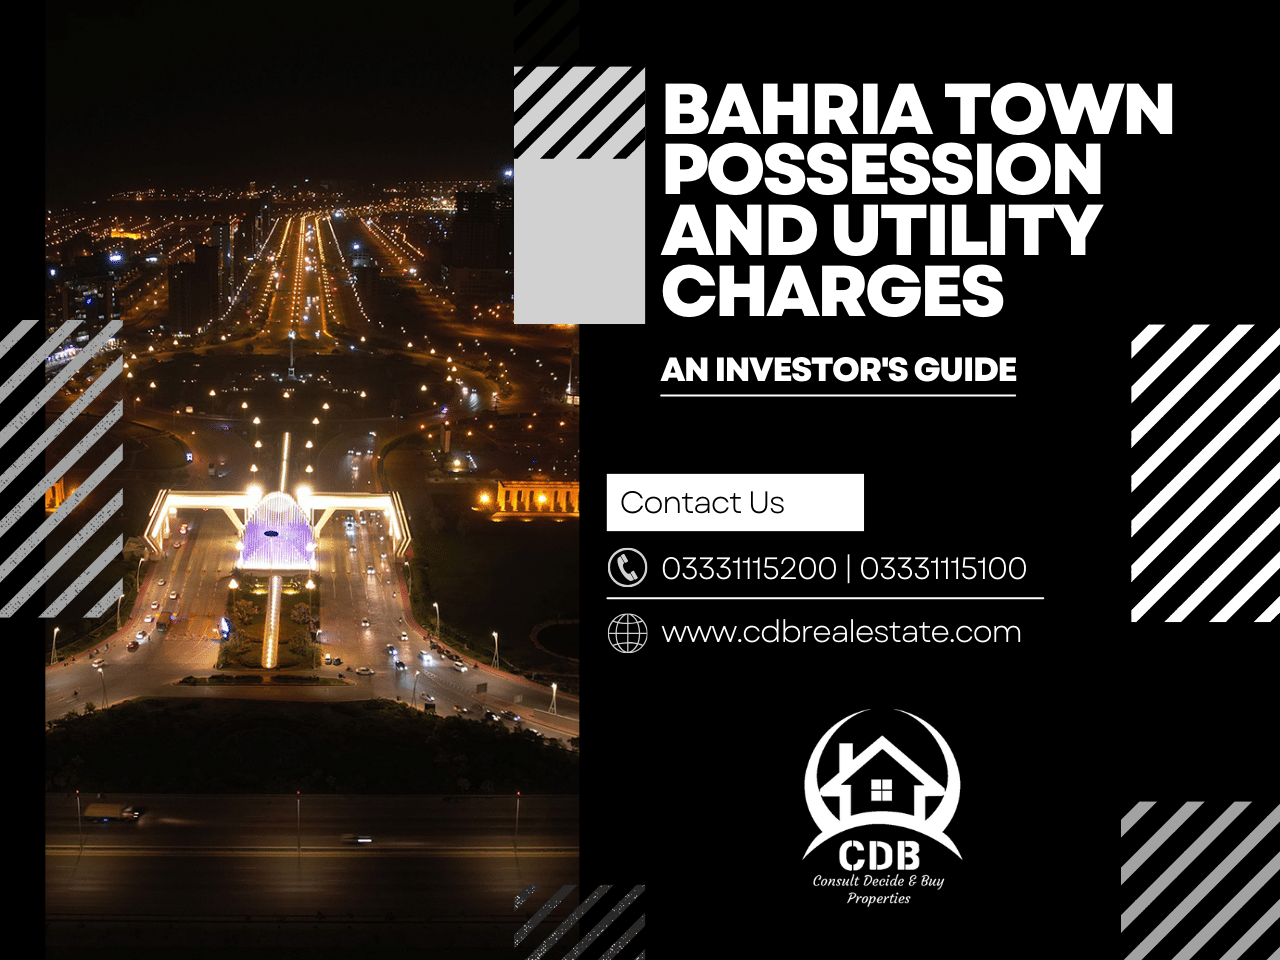 Bahria Town Possession and Utility Charges - An Investor's Guide